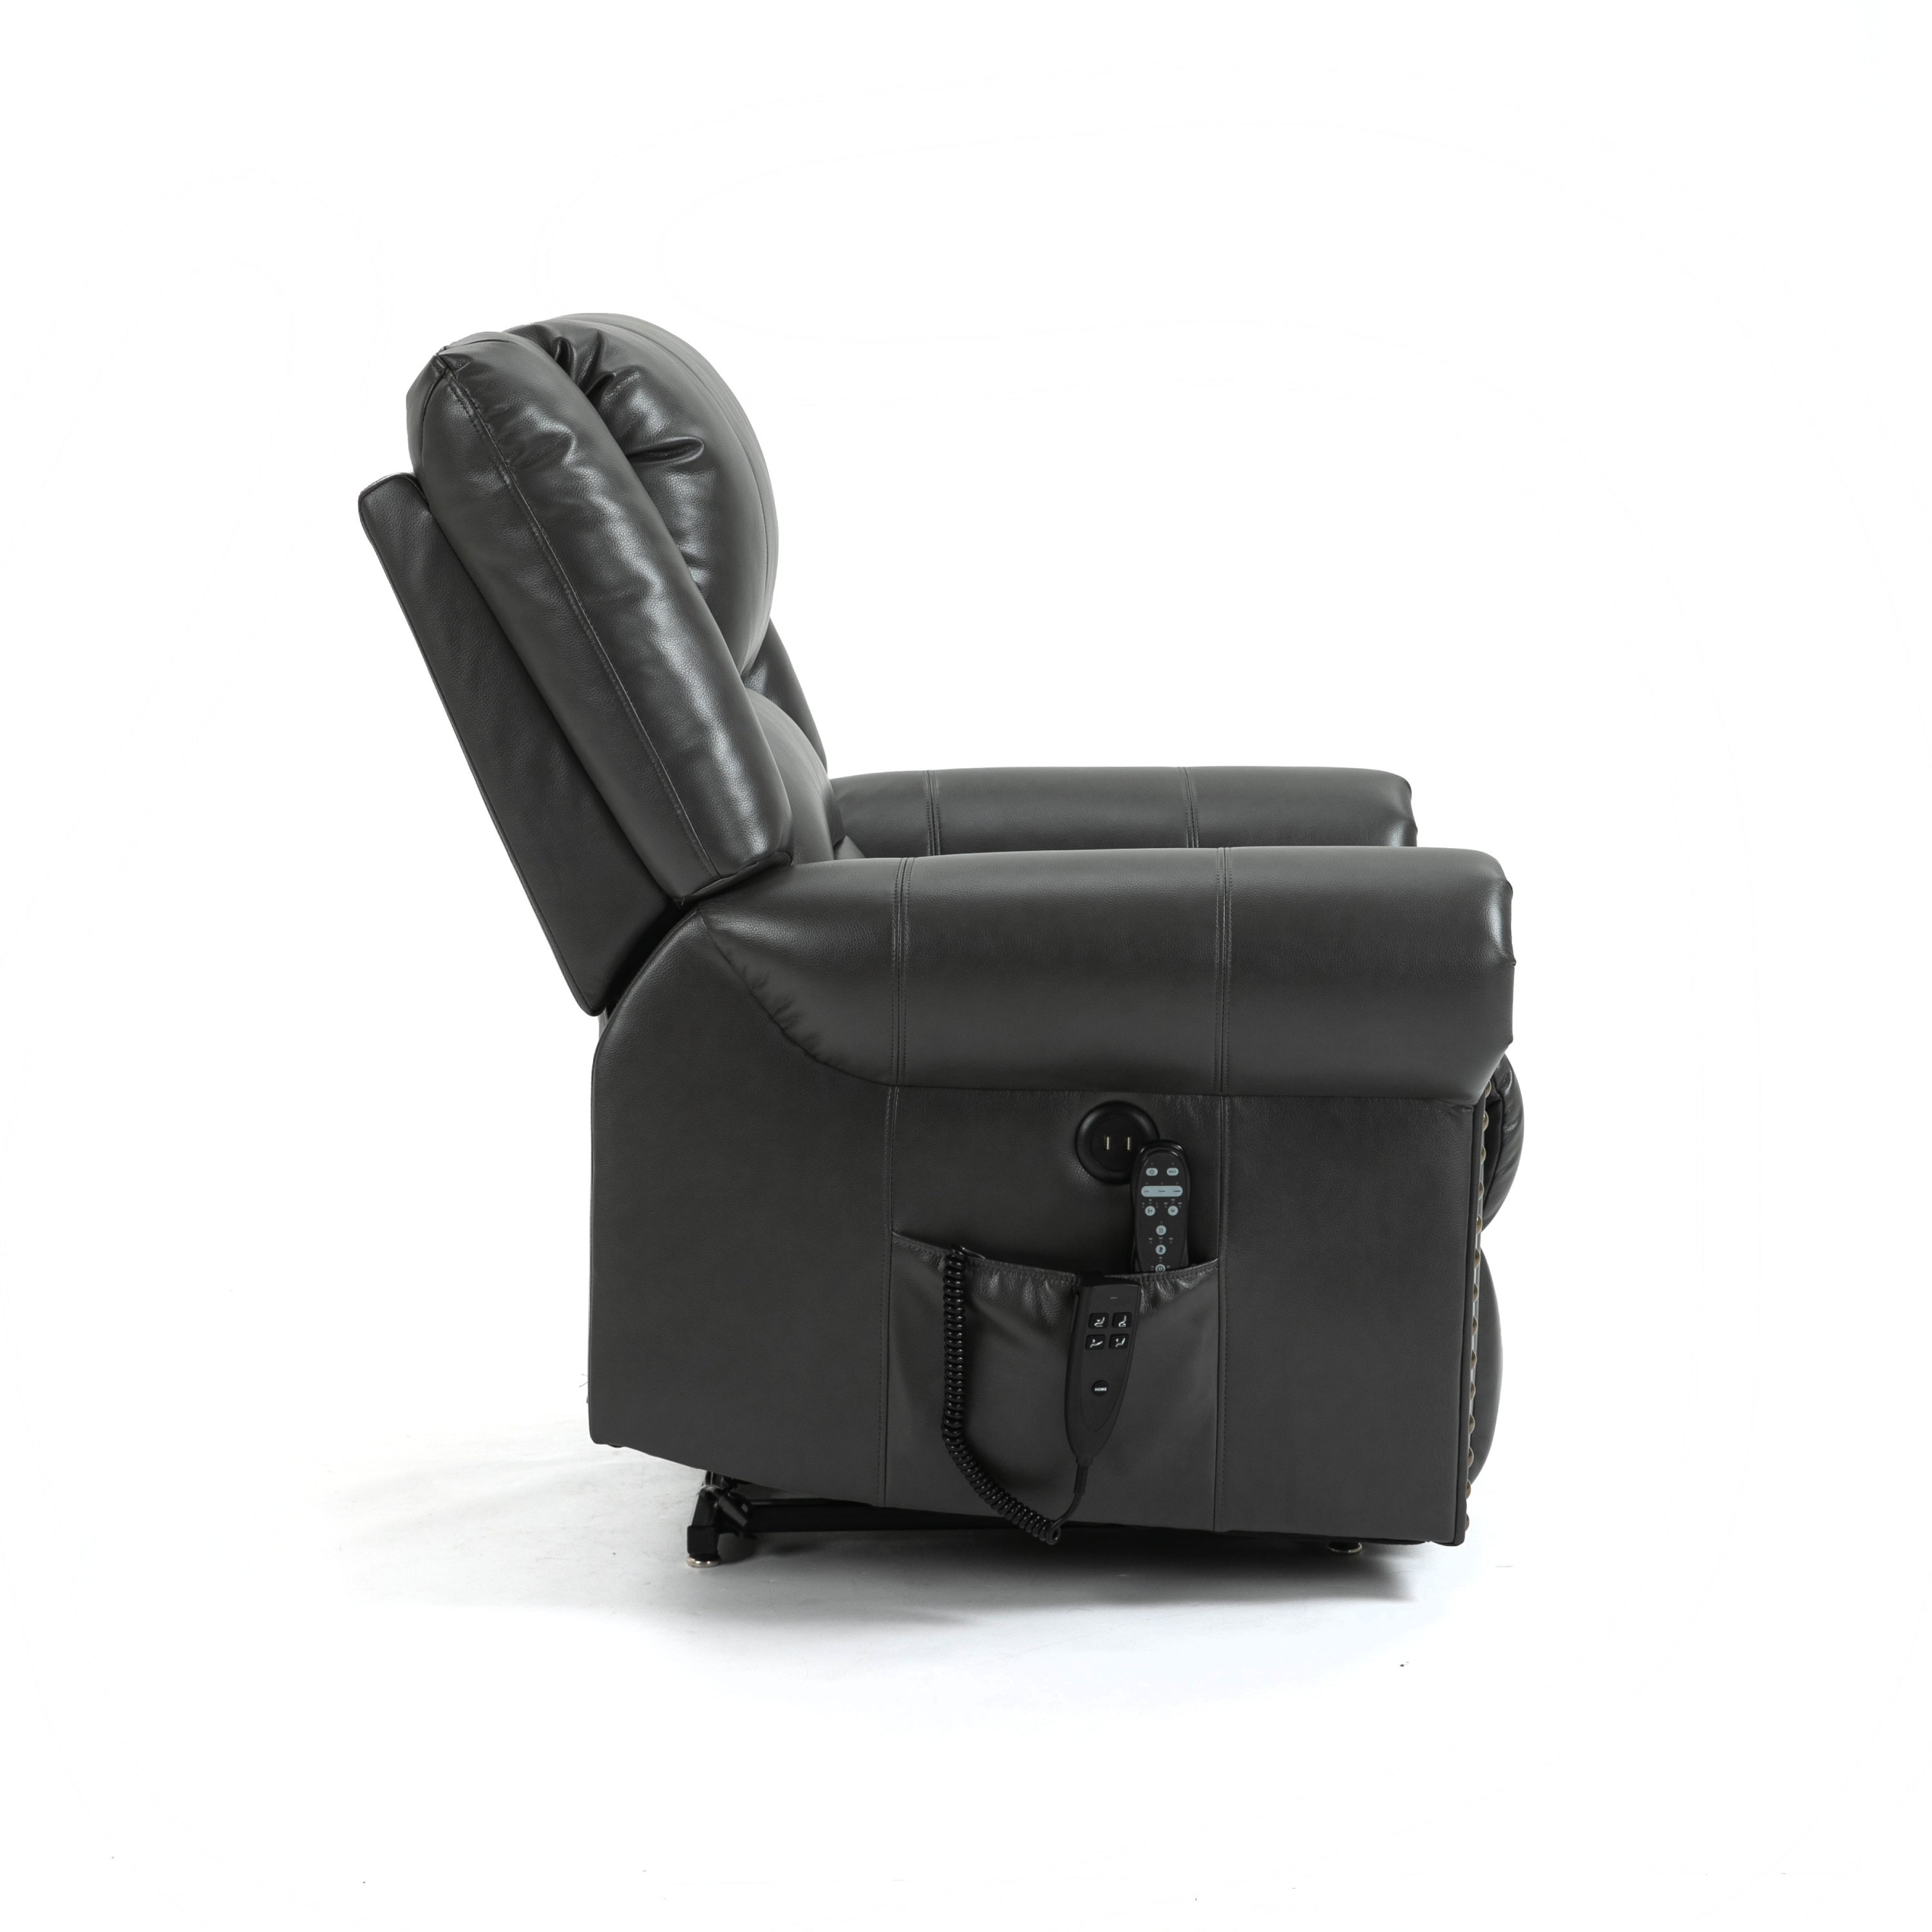 Grey Power Lift Recliner Chair with Heat, Massage, and Infinite Positioning, side view seated